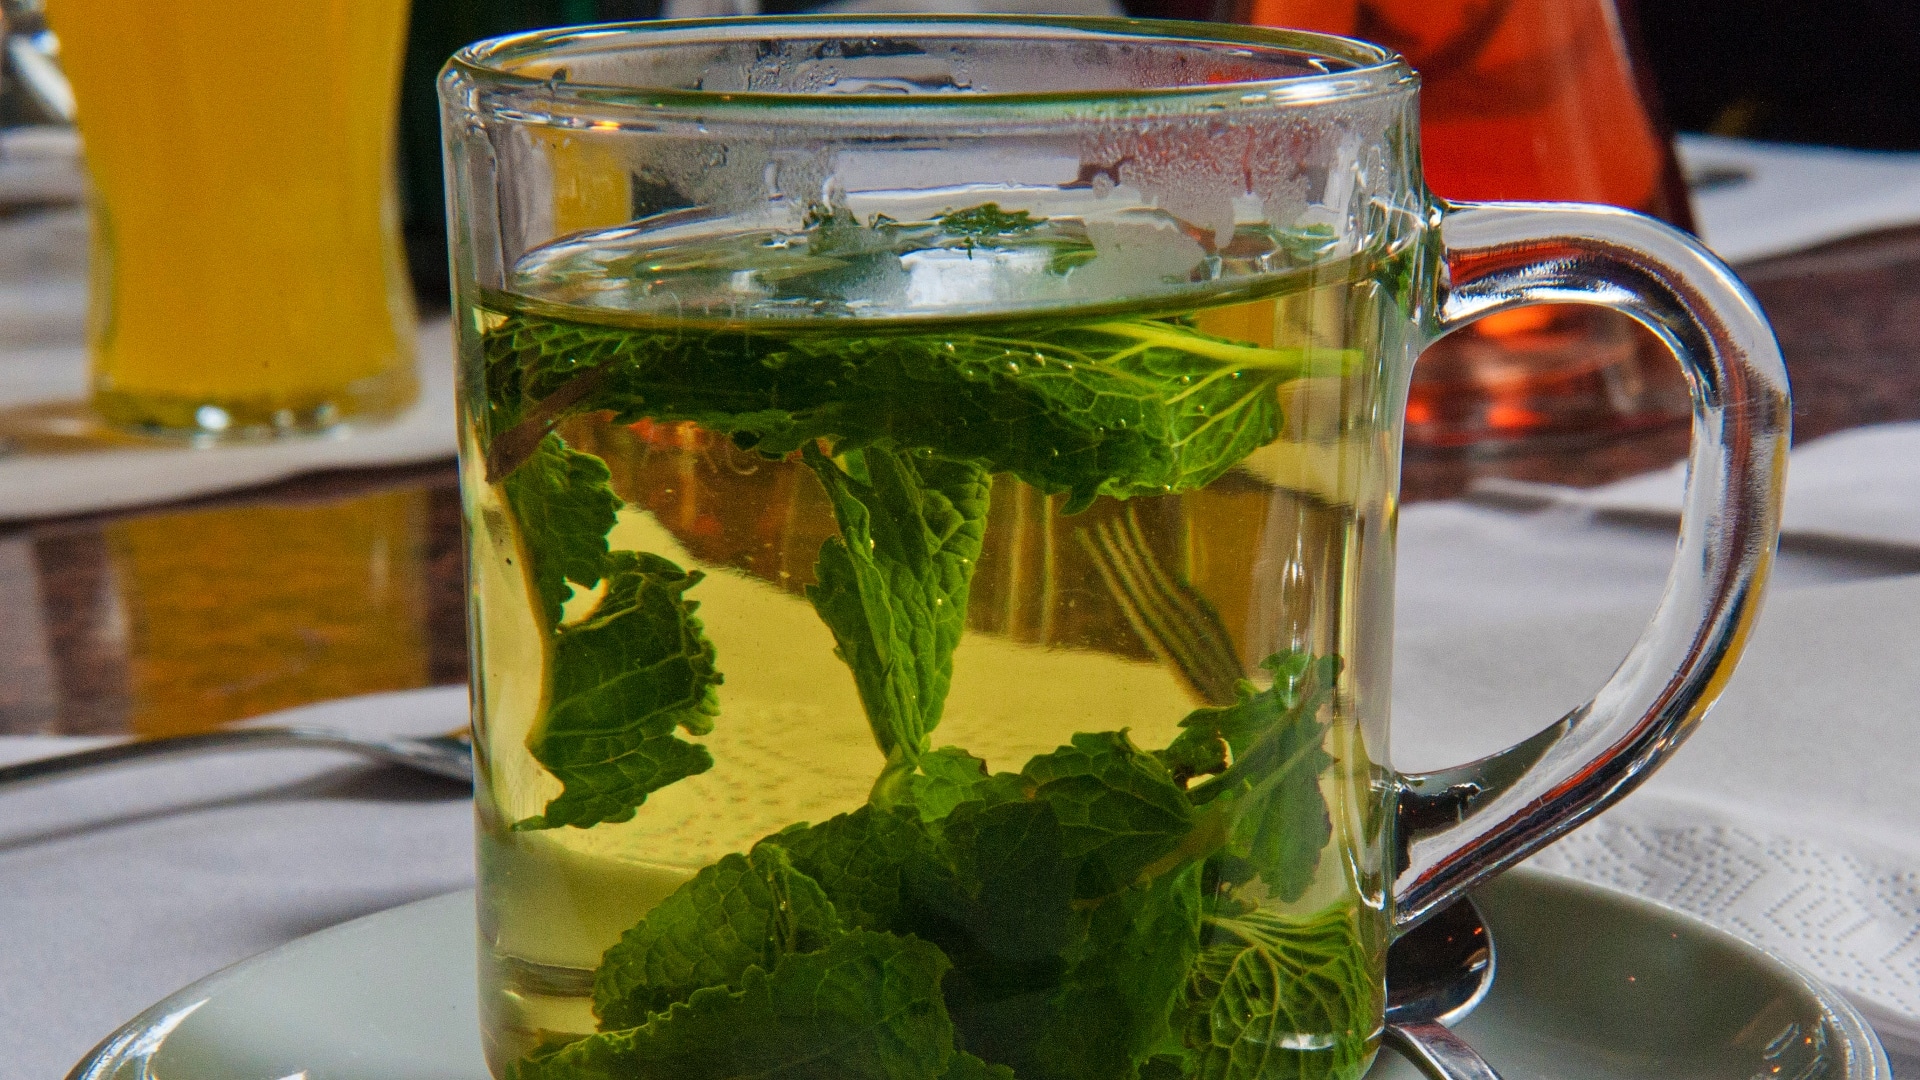 P Grant. Spearmint herbal tea has significant anti-androgen effects in polycystic ovarian syndrome. A randomized controlled trial. Phytother Res. 2010 Feb;24(2):186-8.